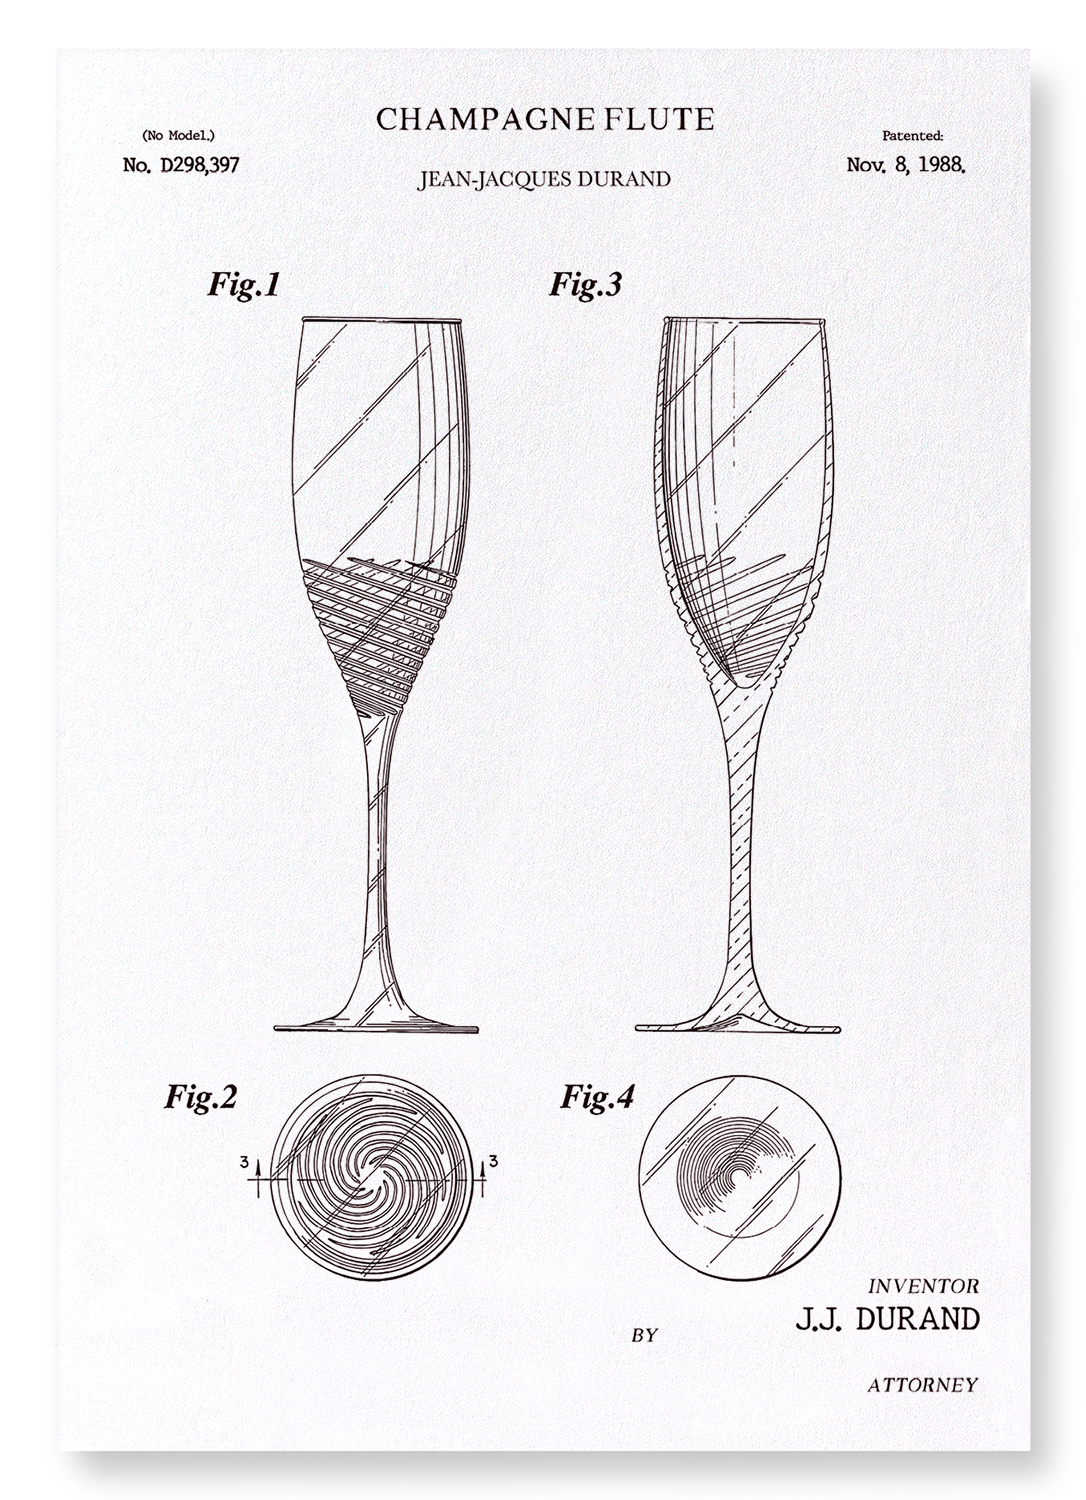 PATENT OF CHAMPAGNE FLUTE (1988)